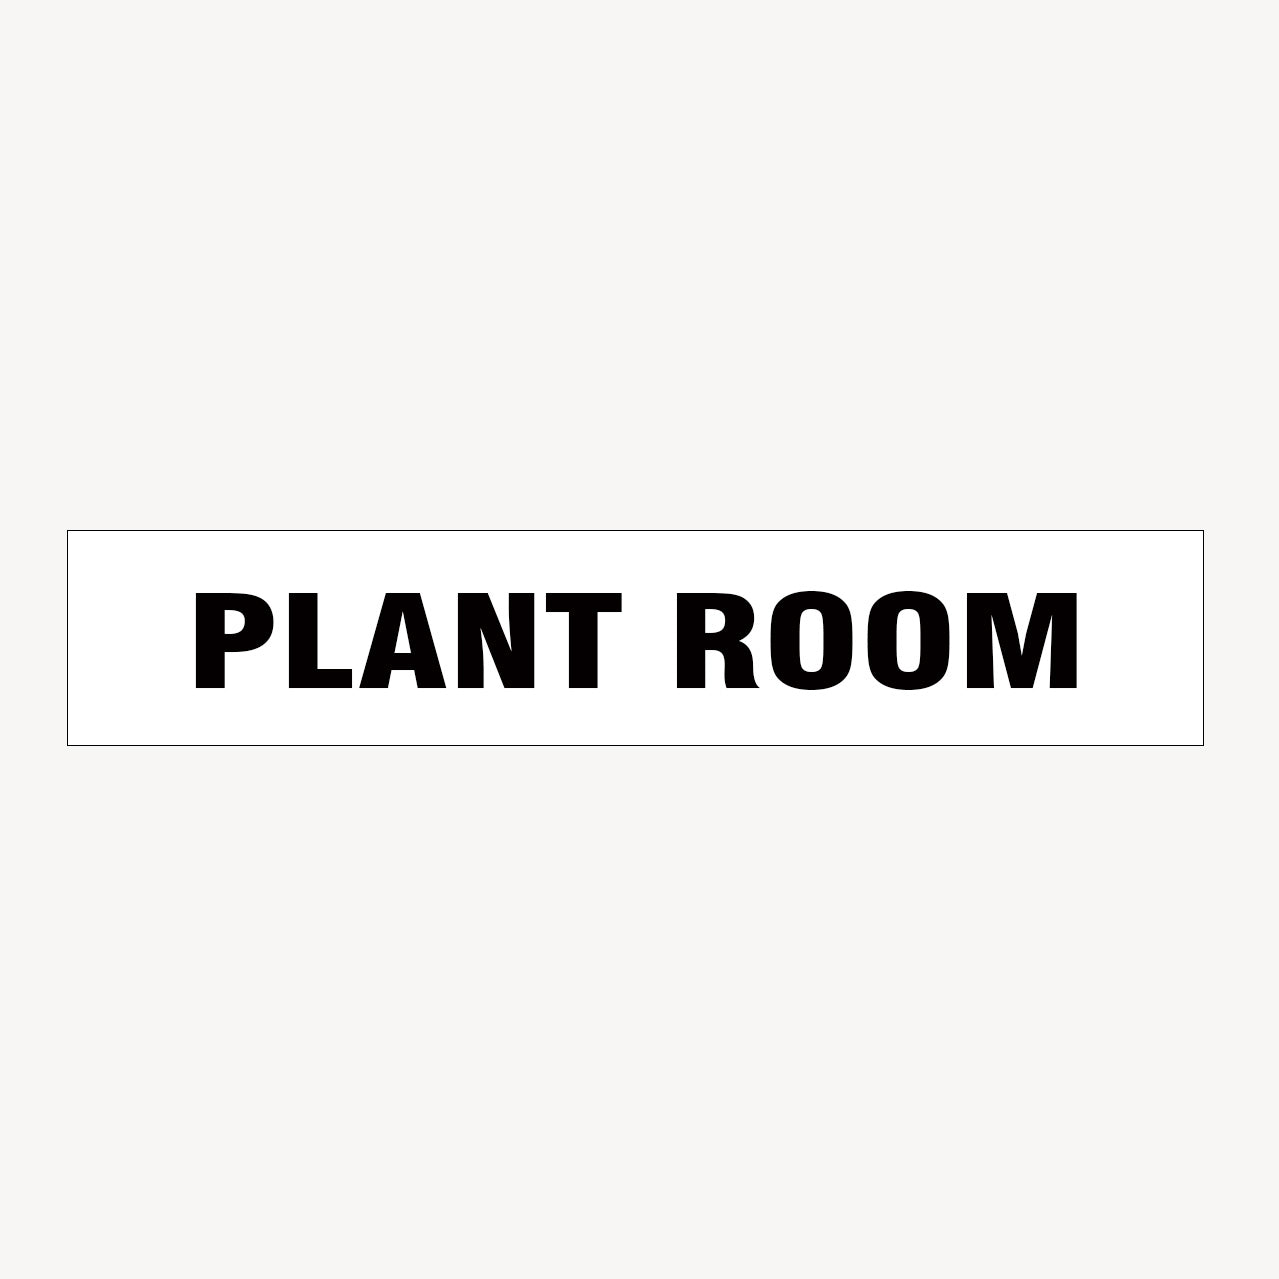 PLANT ROOM SIGN